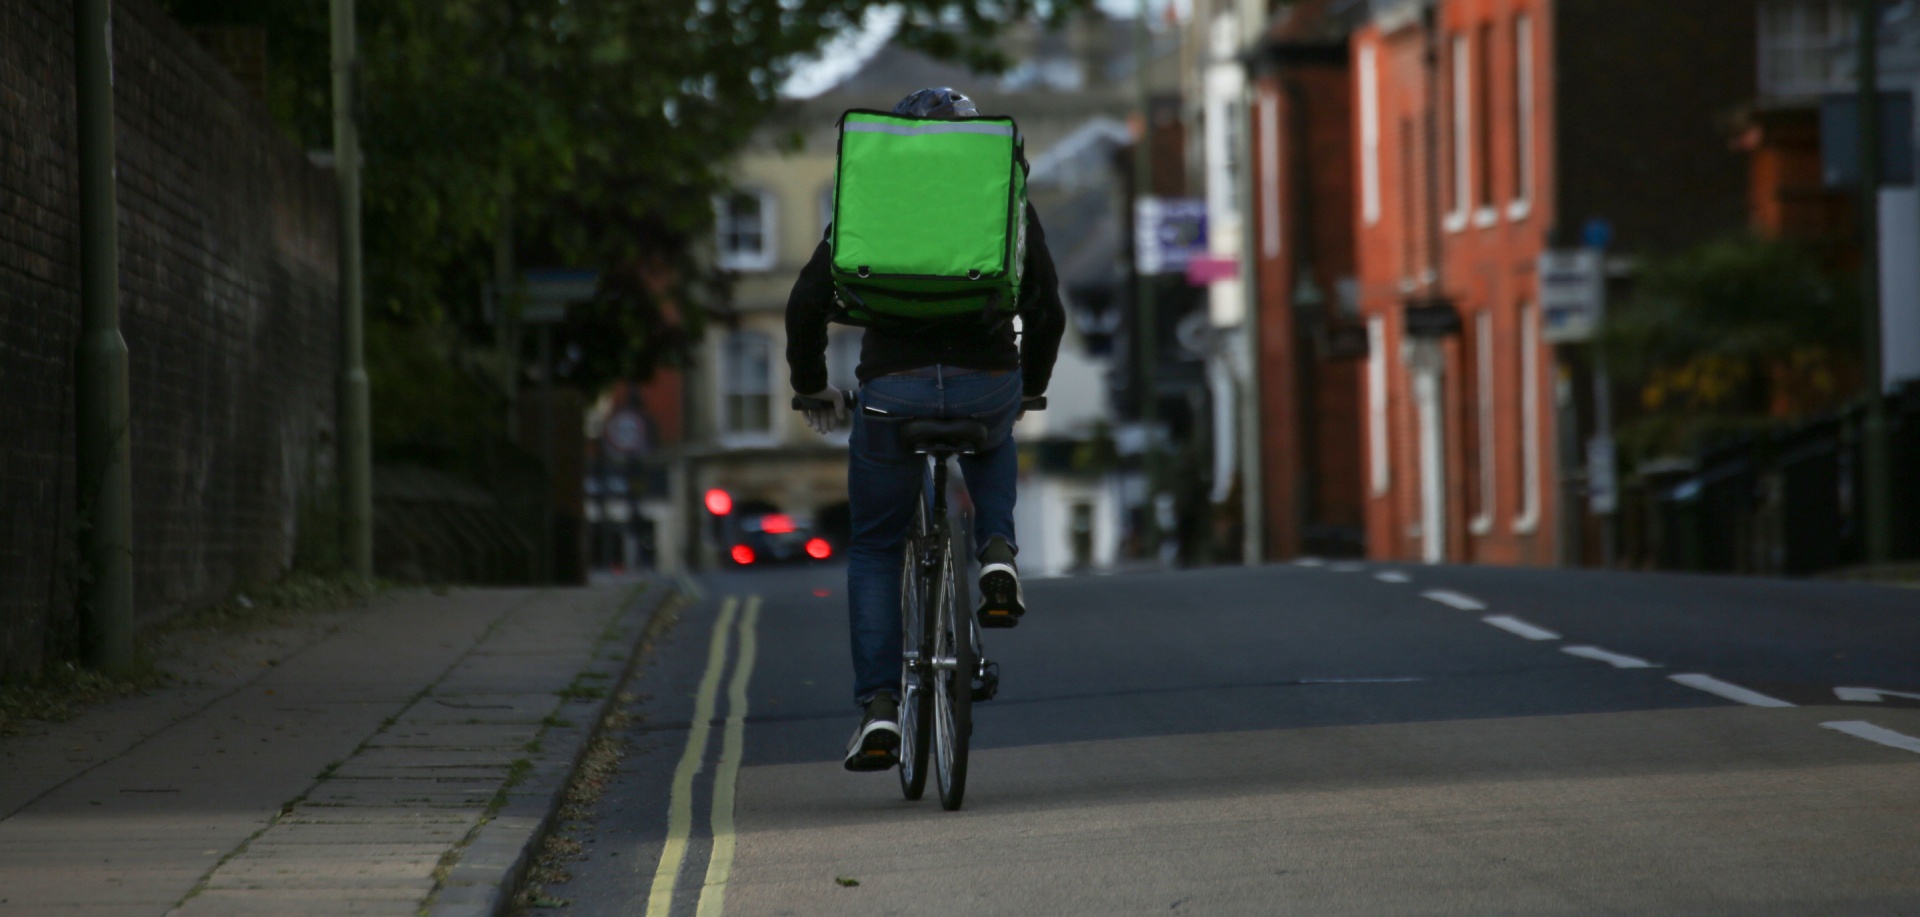 Delivery man rising a bike with a bag on his back down a street.